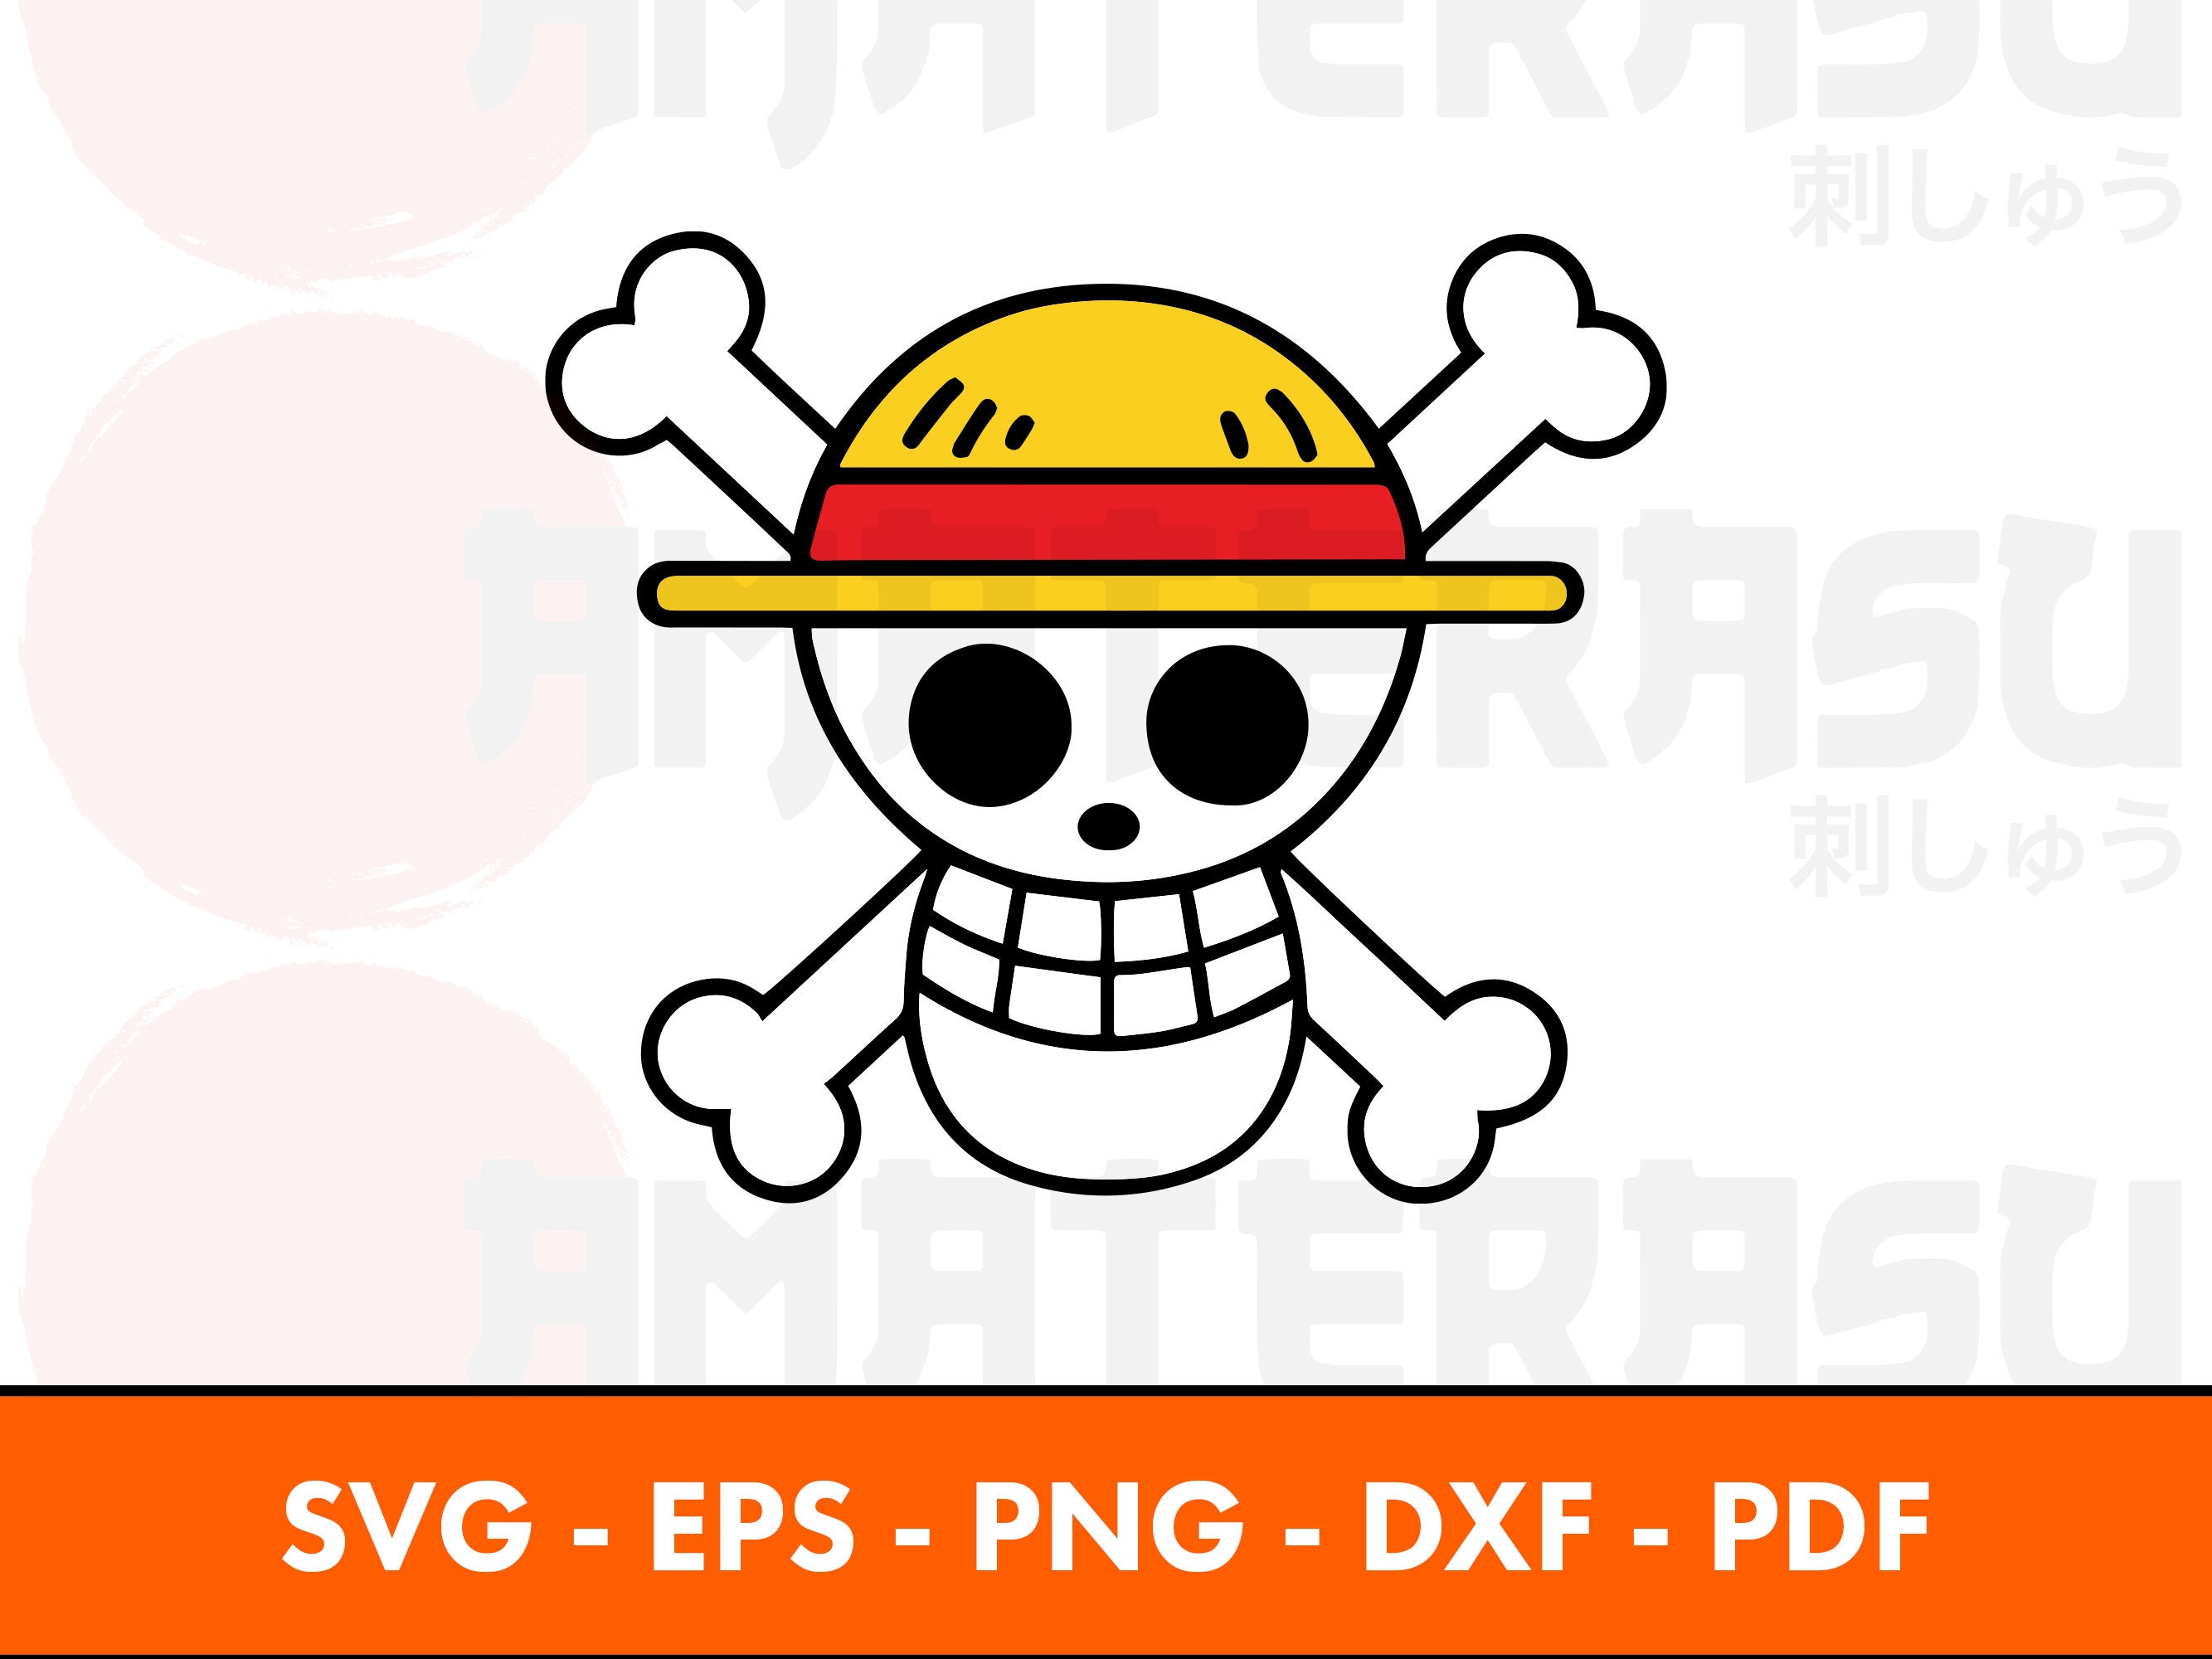 DTF - One Piece – Gg's Creations by Gile